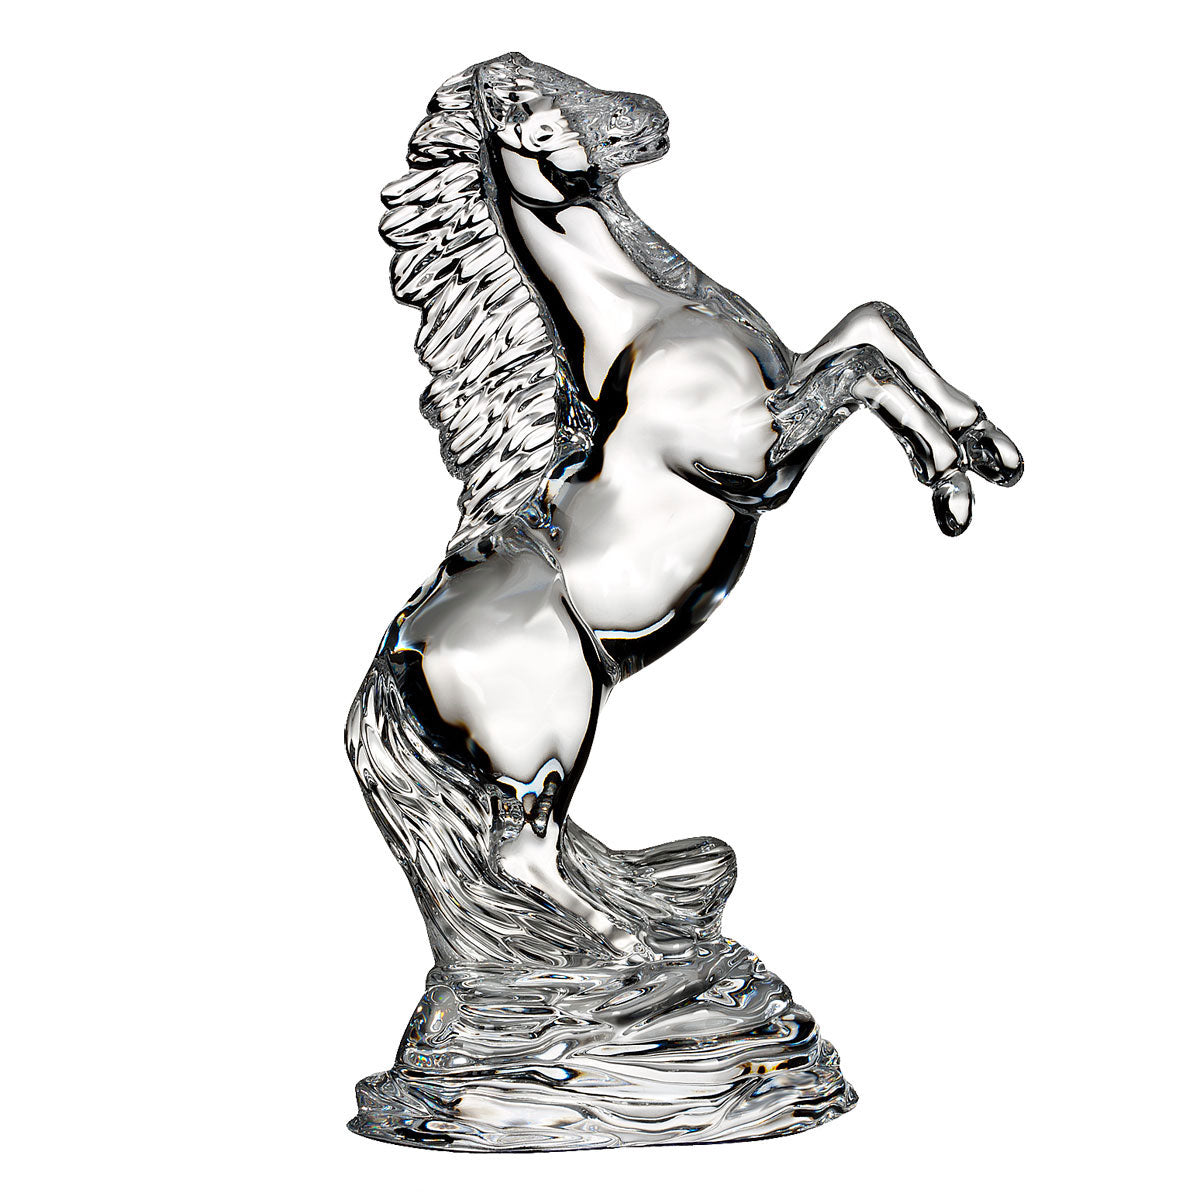 Waterford Crystal Rearing Horse Collectible  This Crystal figurine features a wild stallion rearing on its hind legs with its mane whipping in the wind on a textured base